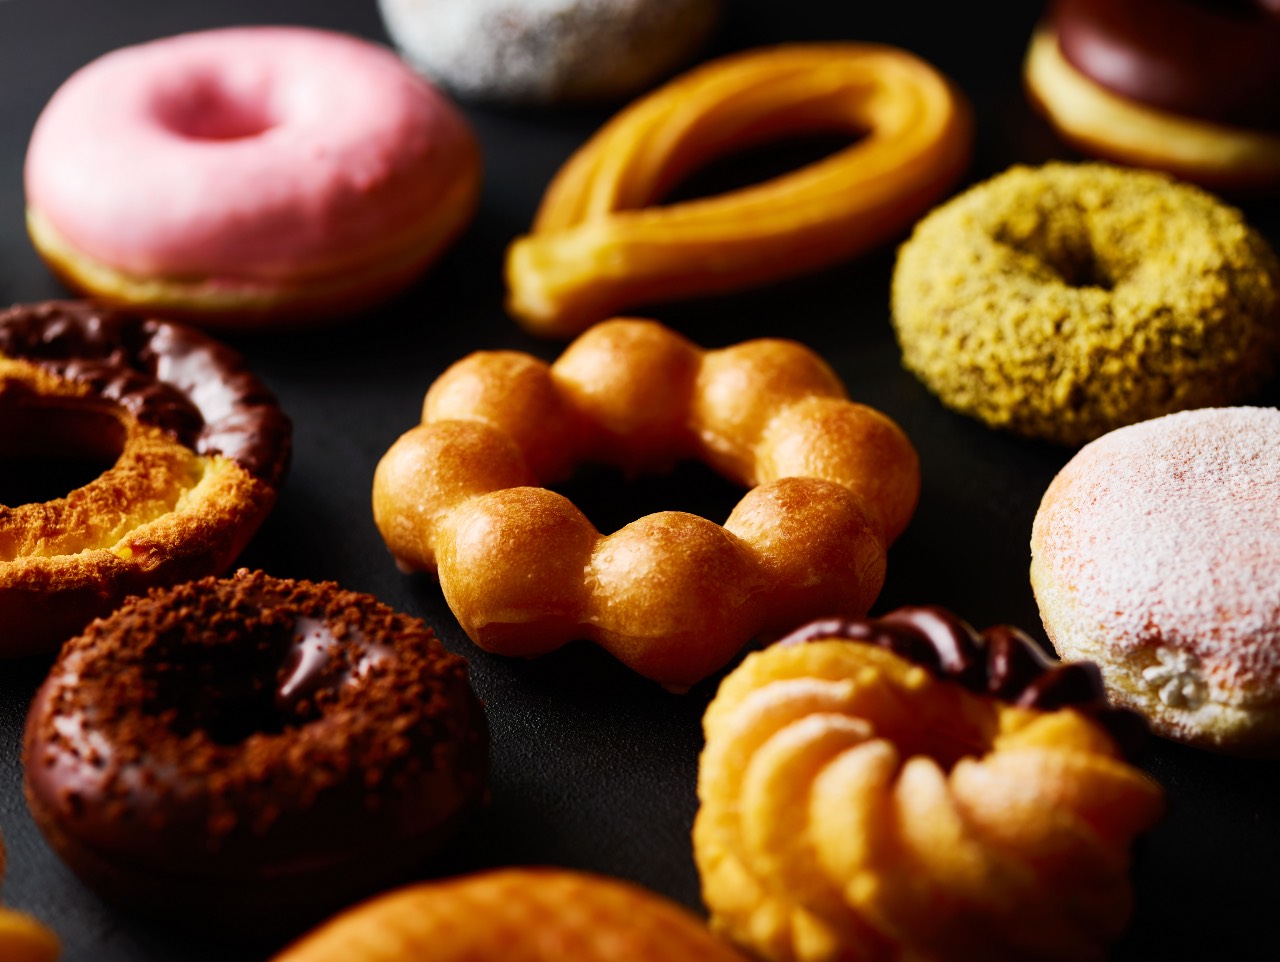 , Mister Donut makes its debut at Junction 8 with Singapore-exclusive flavours